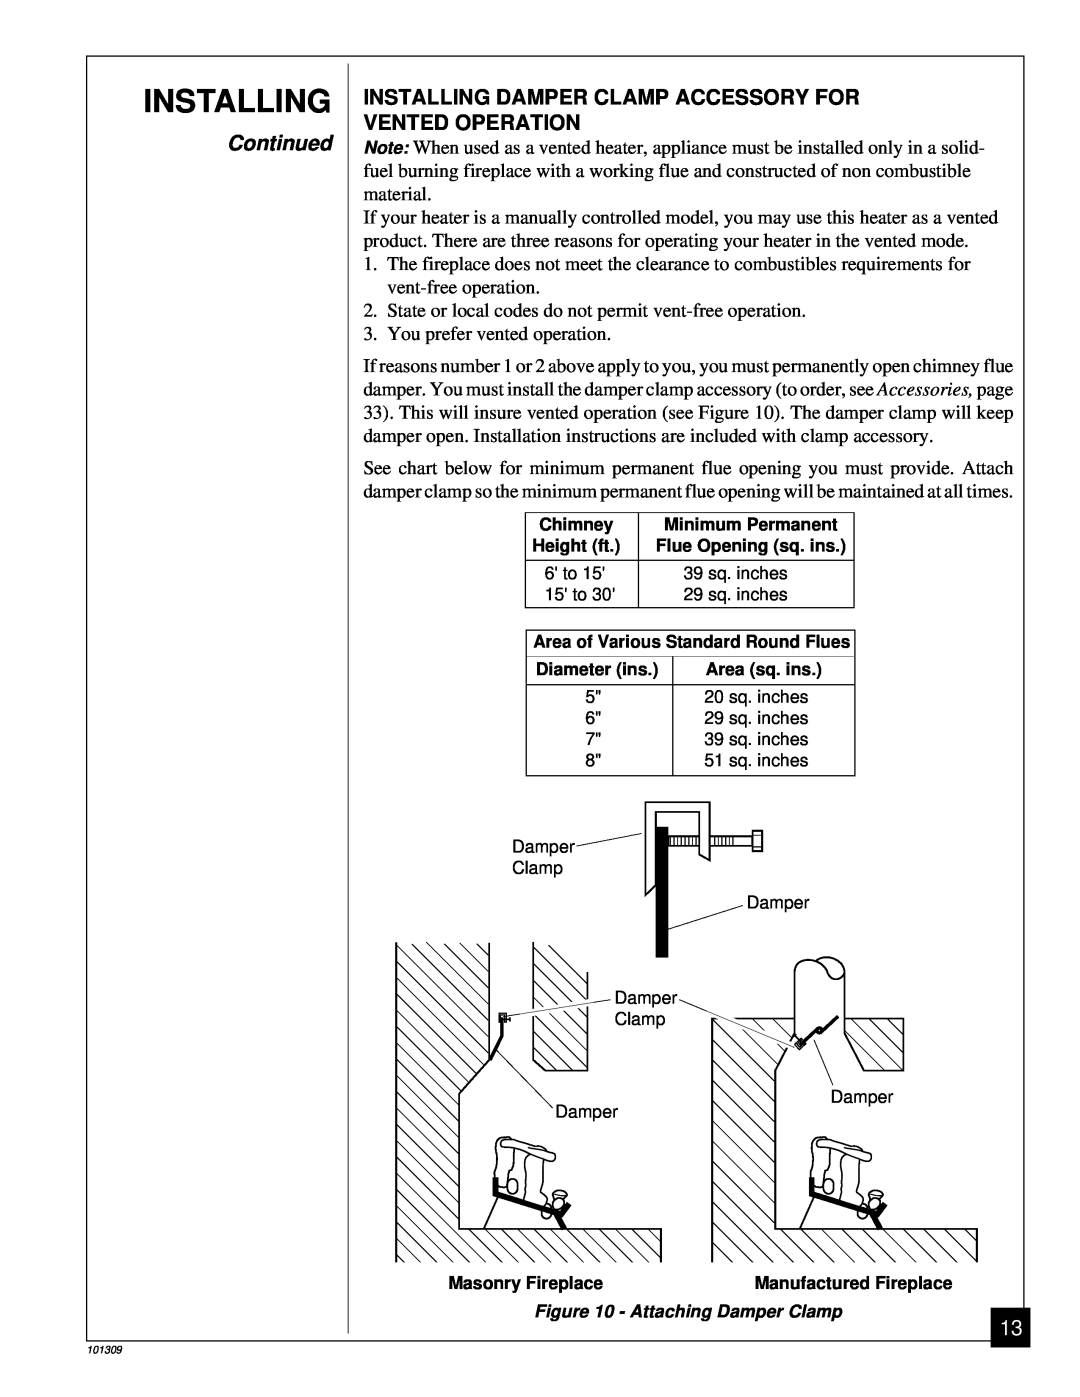 Desa UNVENTED (VENT-FREE) PROPANE GAS LOG HEATER installation manual Installing, Continued, You prefer vented operation 